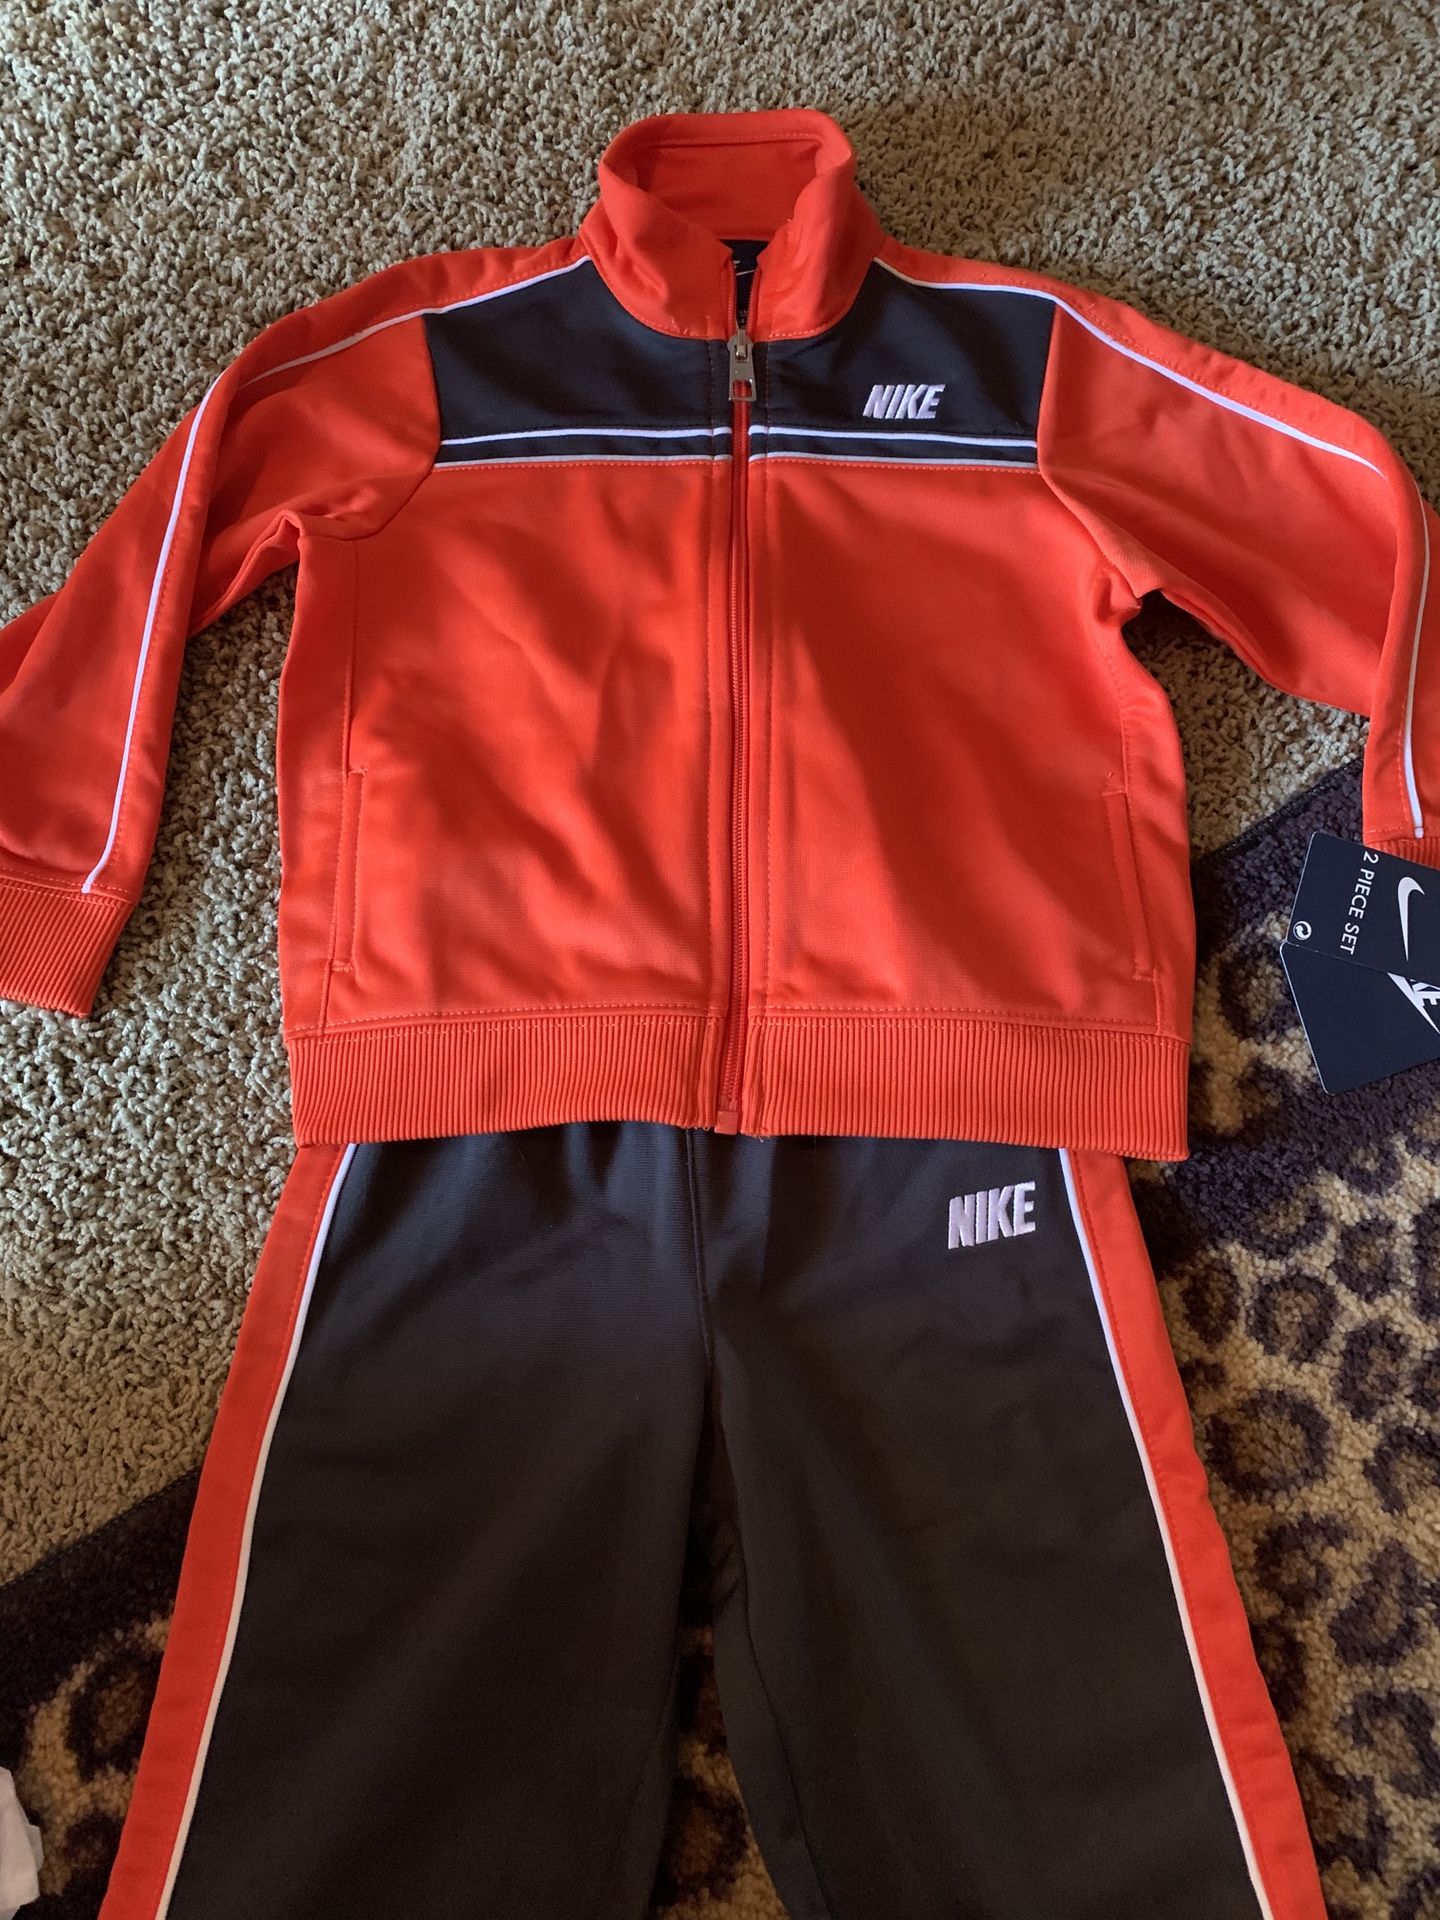 Kids Nike Track Suit Set (Size 24 months)(Brand New)